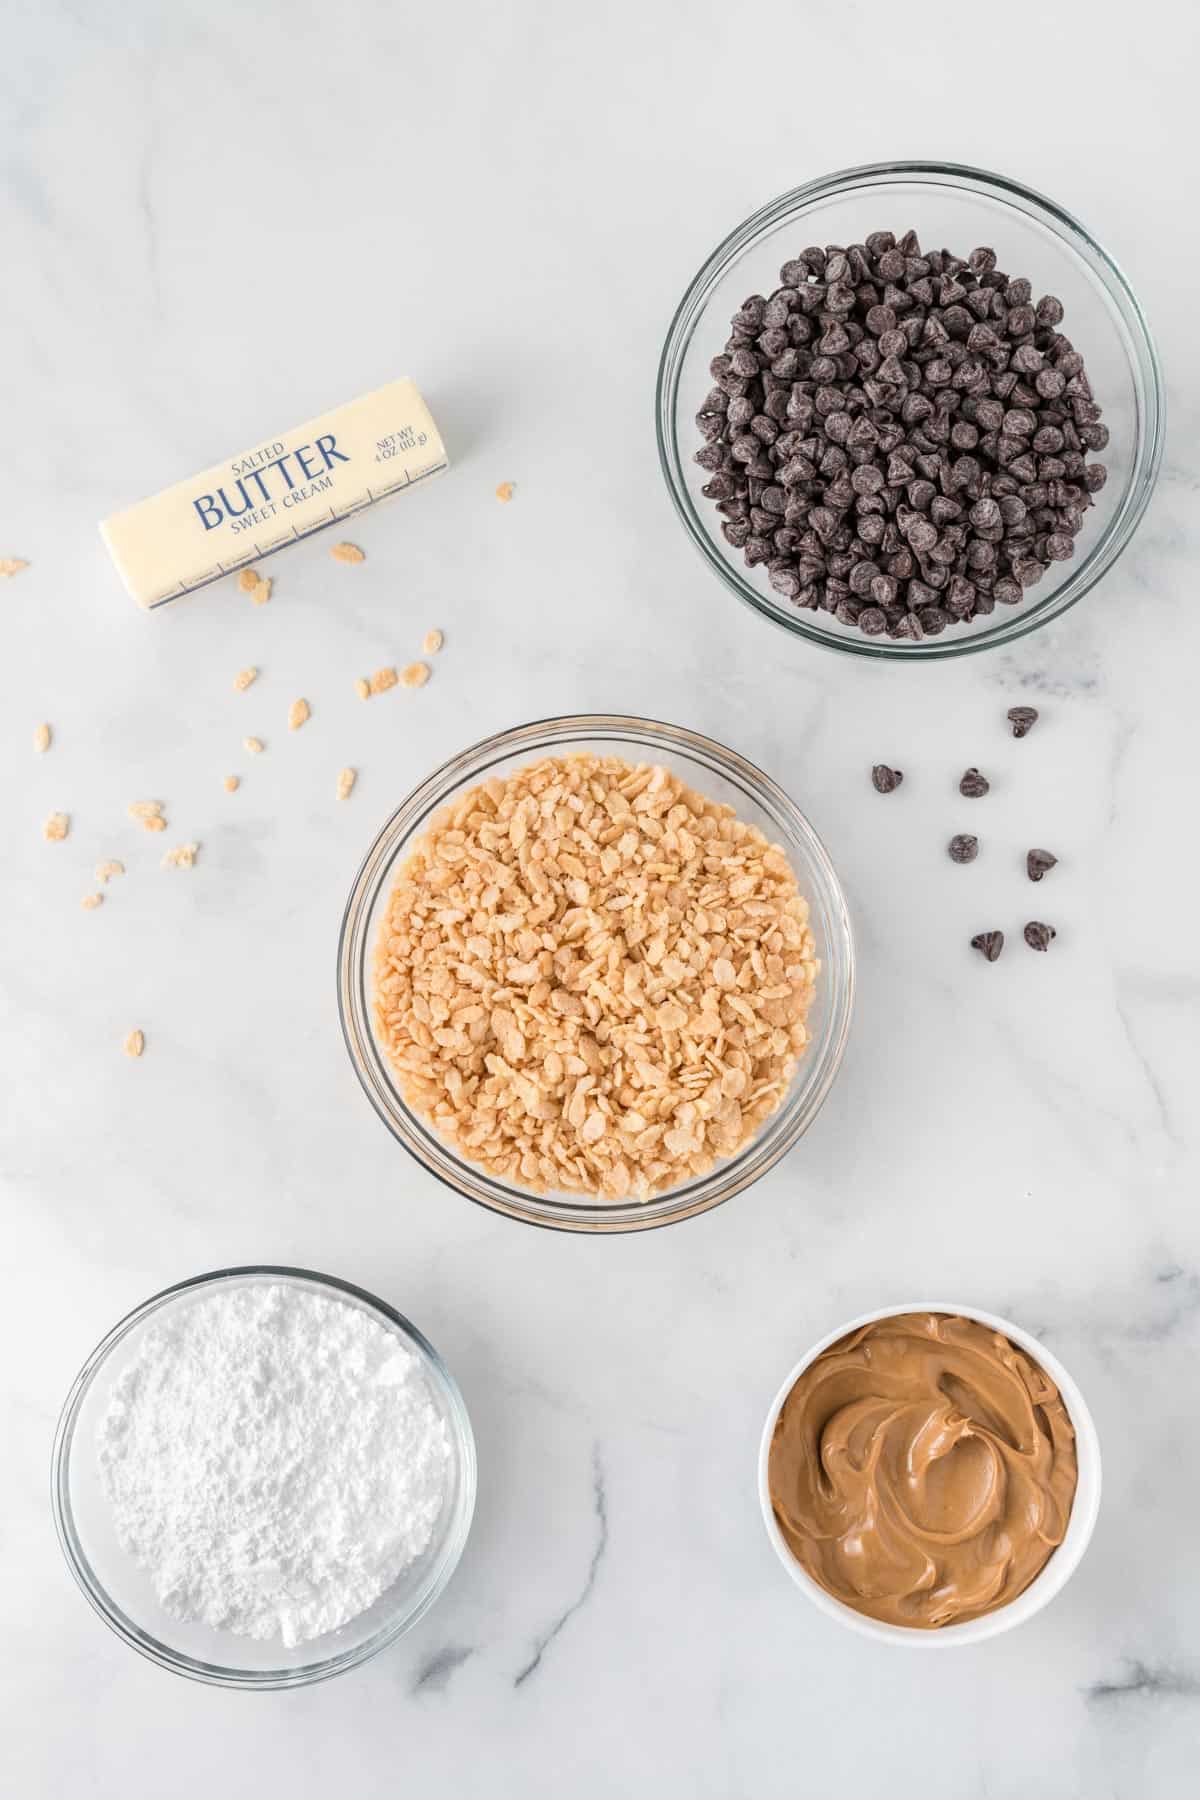 ingredients needed to make peanut butter balls with rice krispies